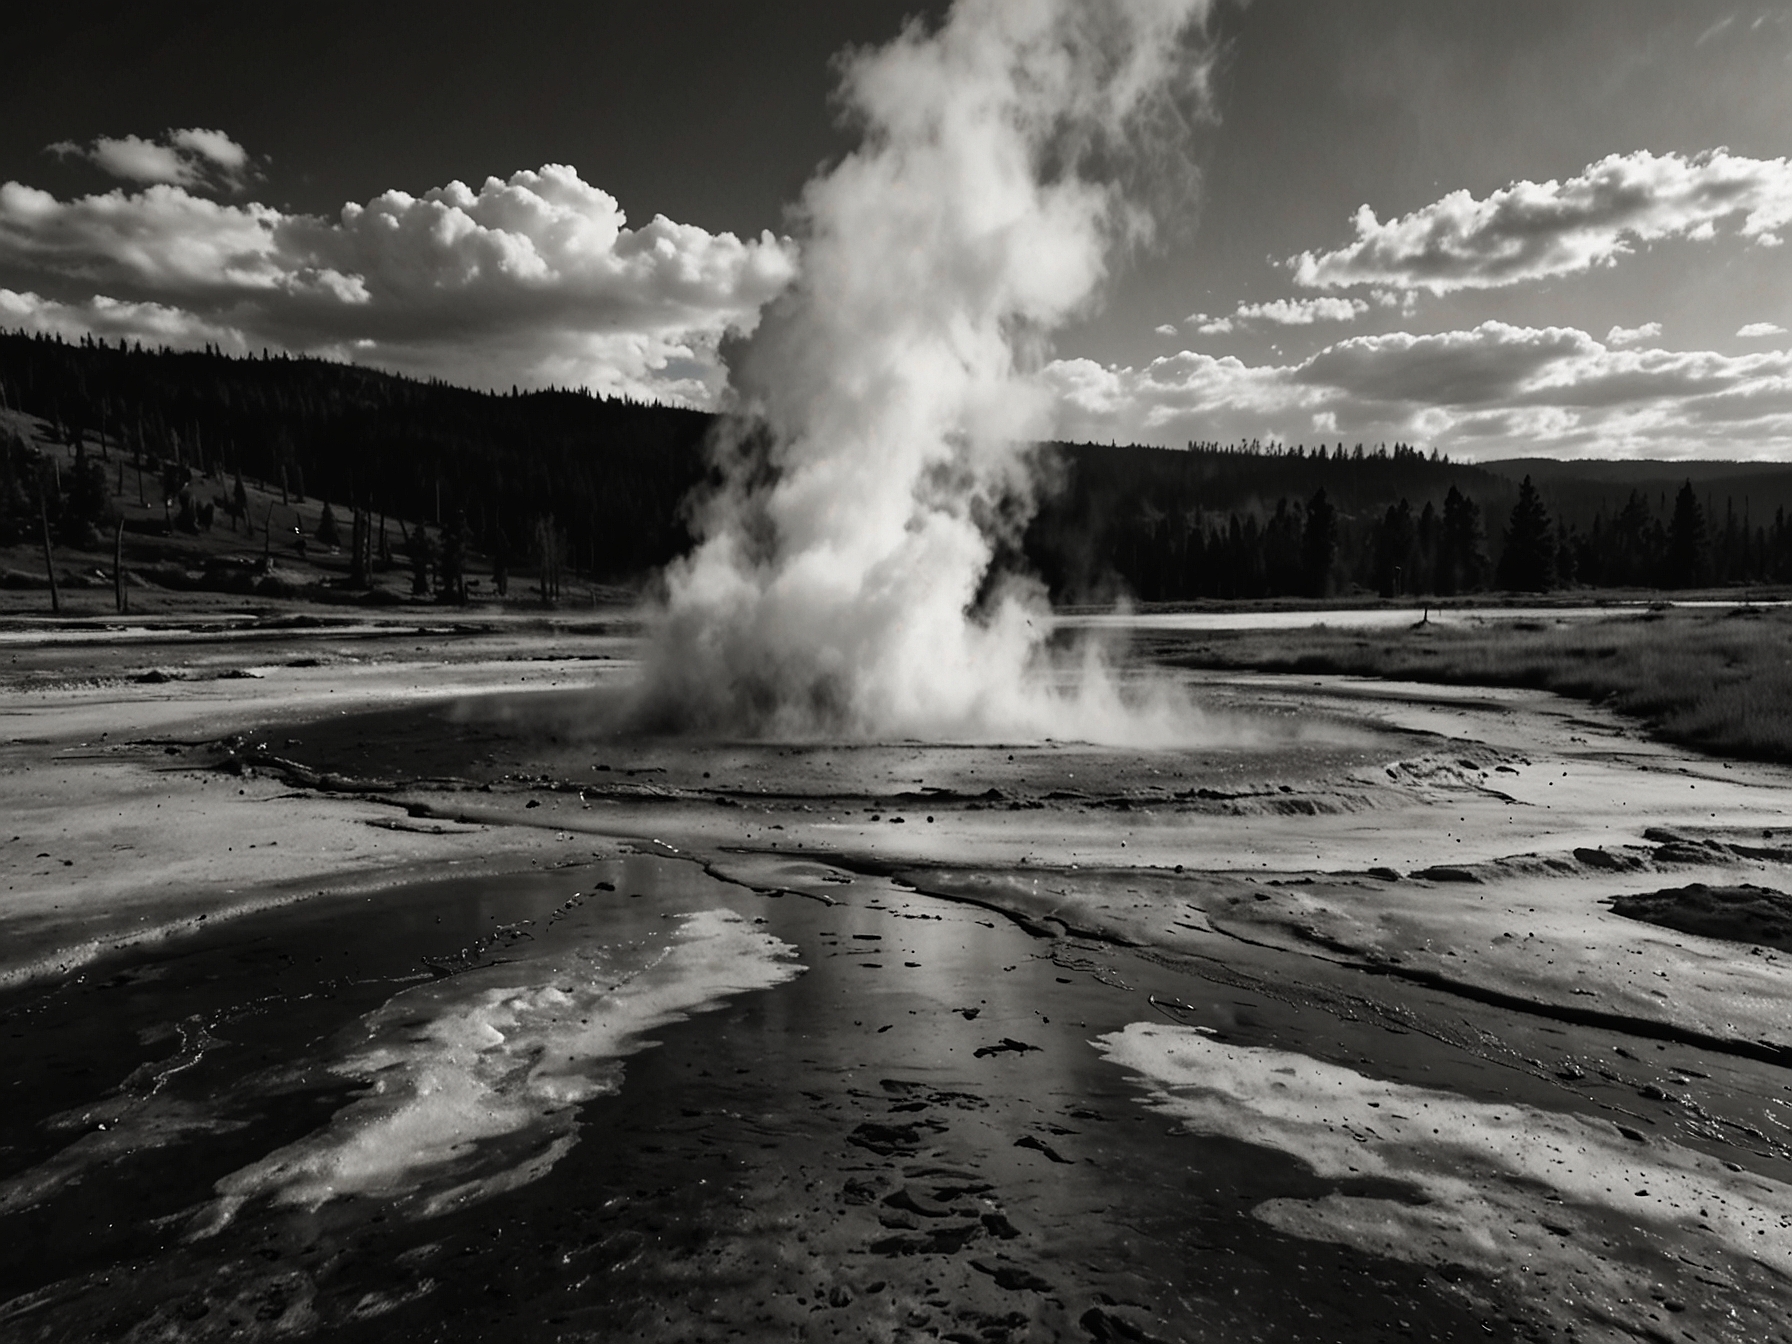 A majestic view of Yellowstone National Park's geysers with steam rising into the air.